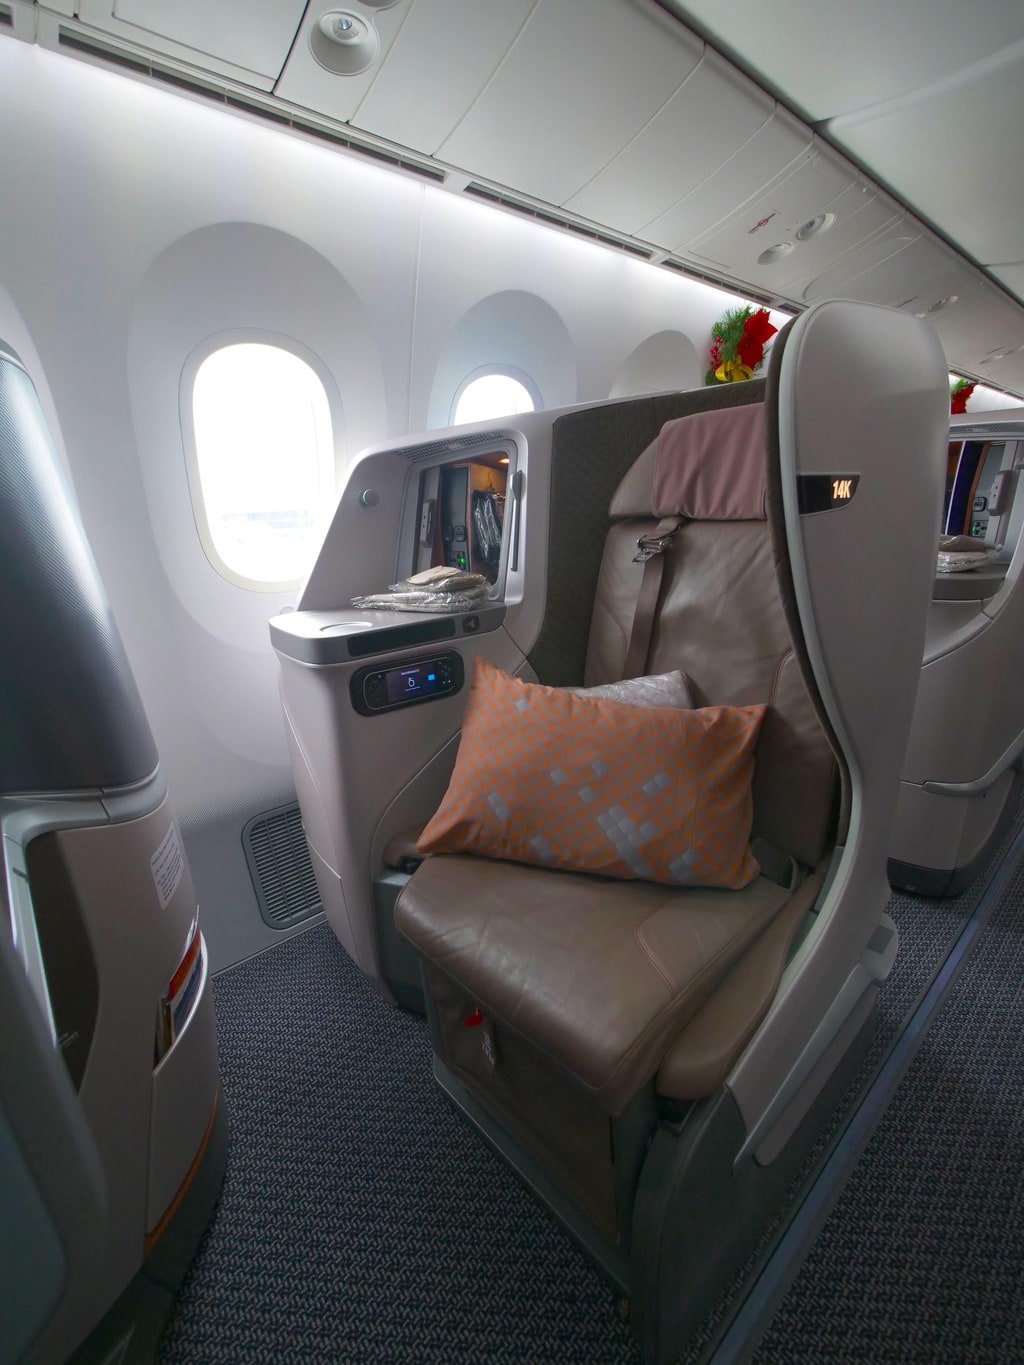 Review Of Singapore Airlines Boeing 787 10 Business Class